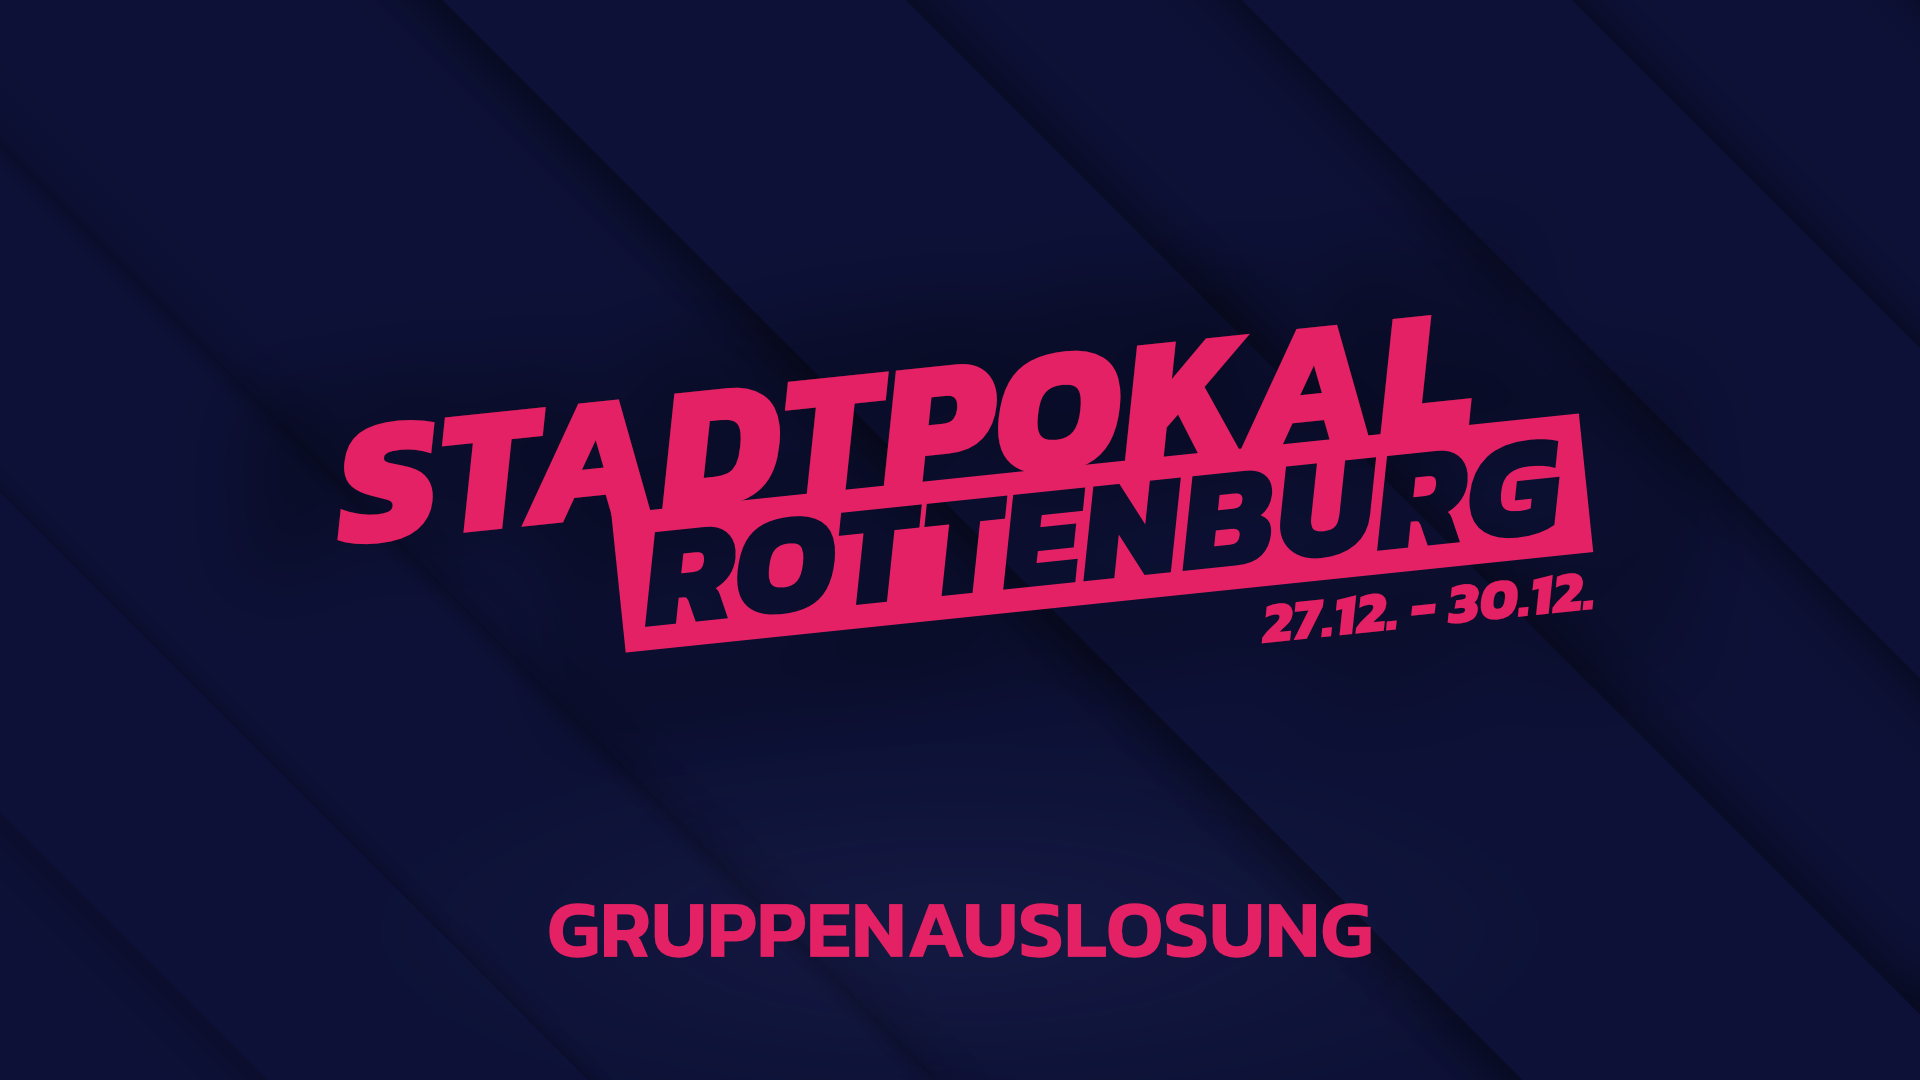 You are currently viewing Donnerstag 19:15 Uhr: Livestream – Gruppenauslosung Rottenburger Stadtpokal